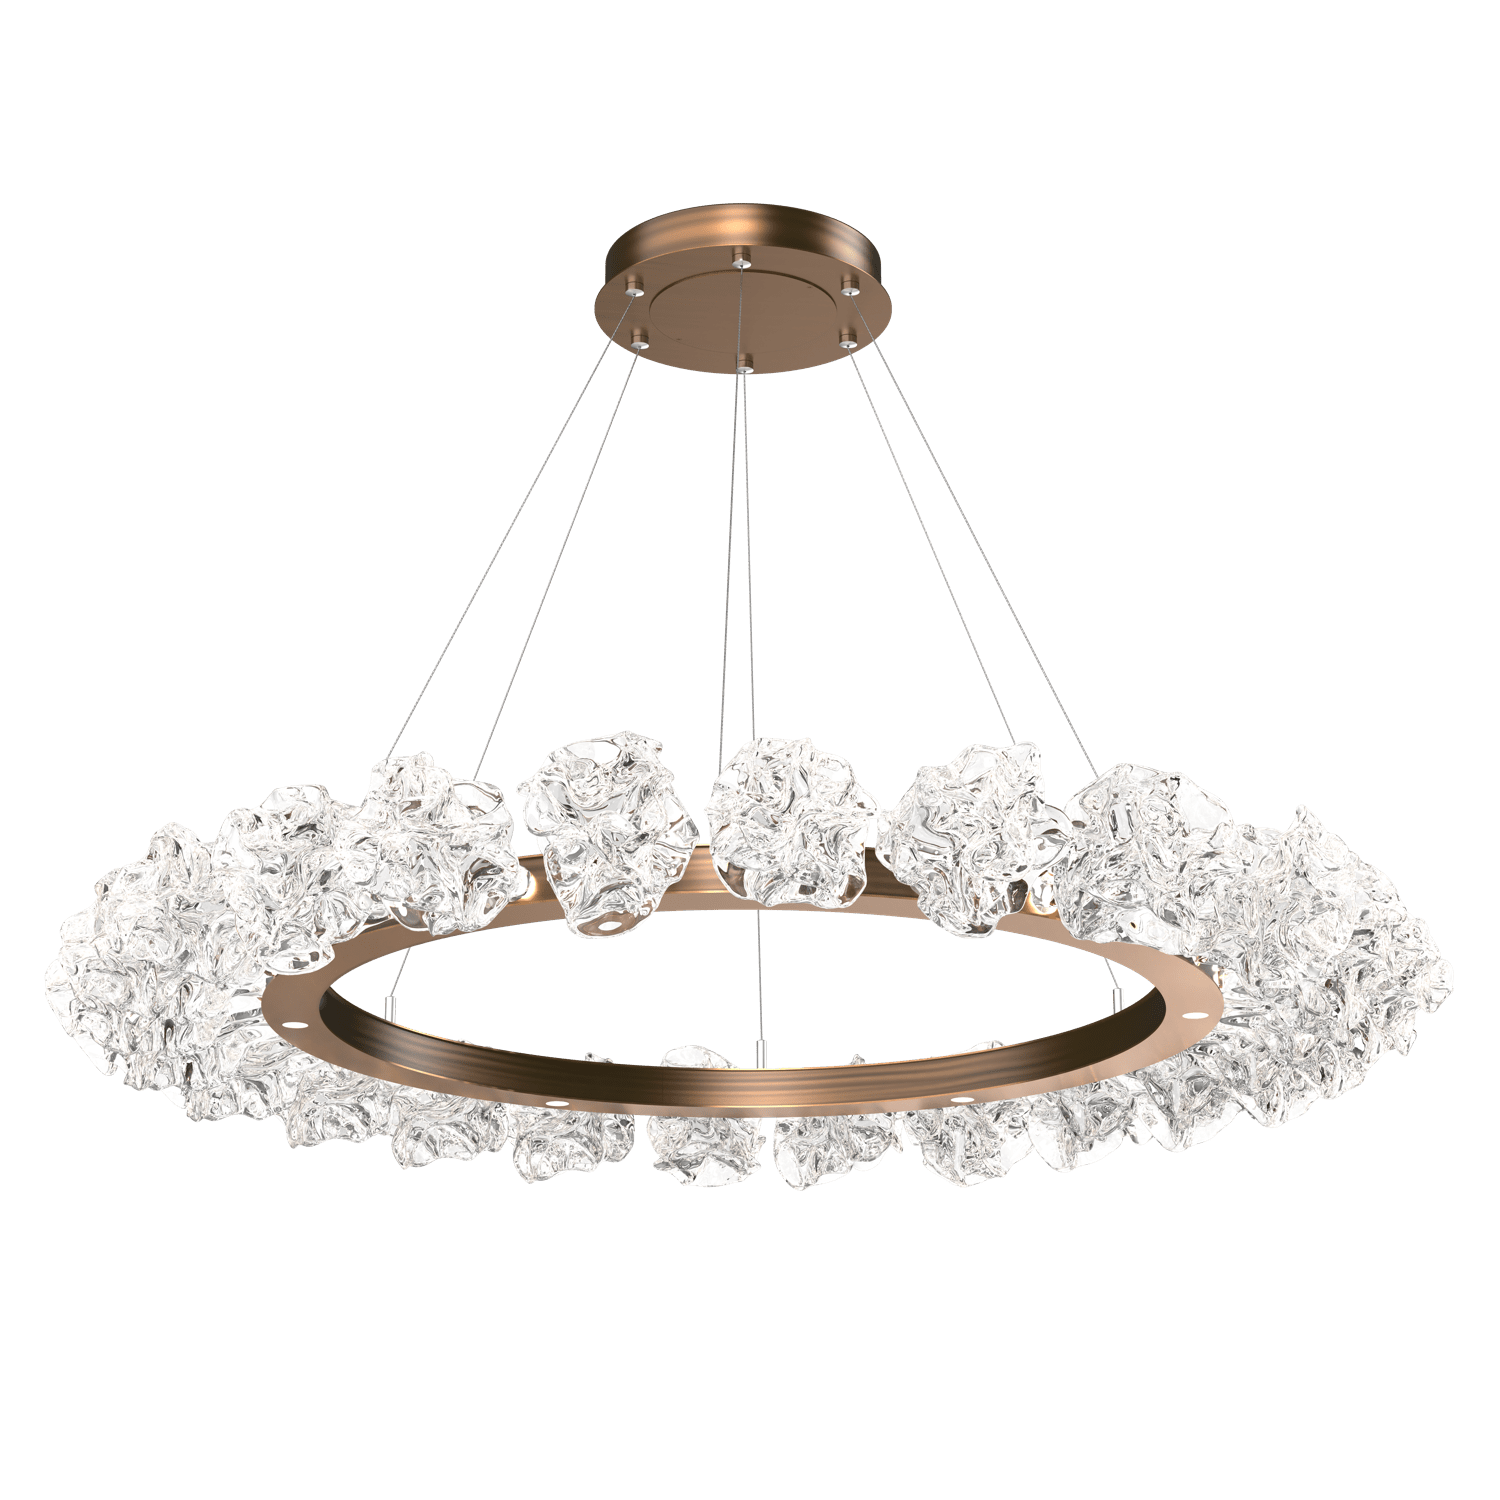 CHB0059-50-RB-Hammerton-Studio-Blossom-50-inch-radial-ring-chandelier-with-oil-rubbed-bronze-finish-and-clear-handblown-crystal-glass-shades-and-LED-lamping